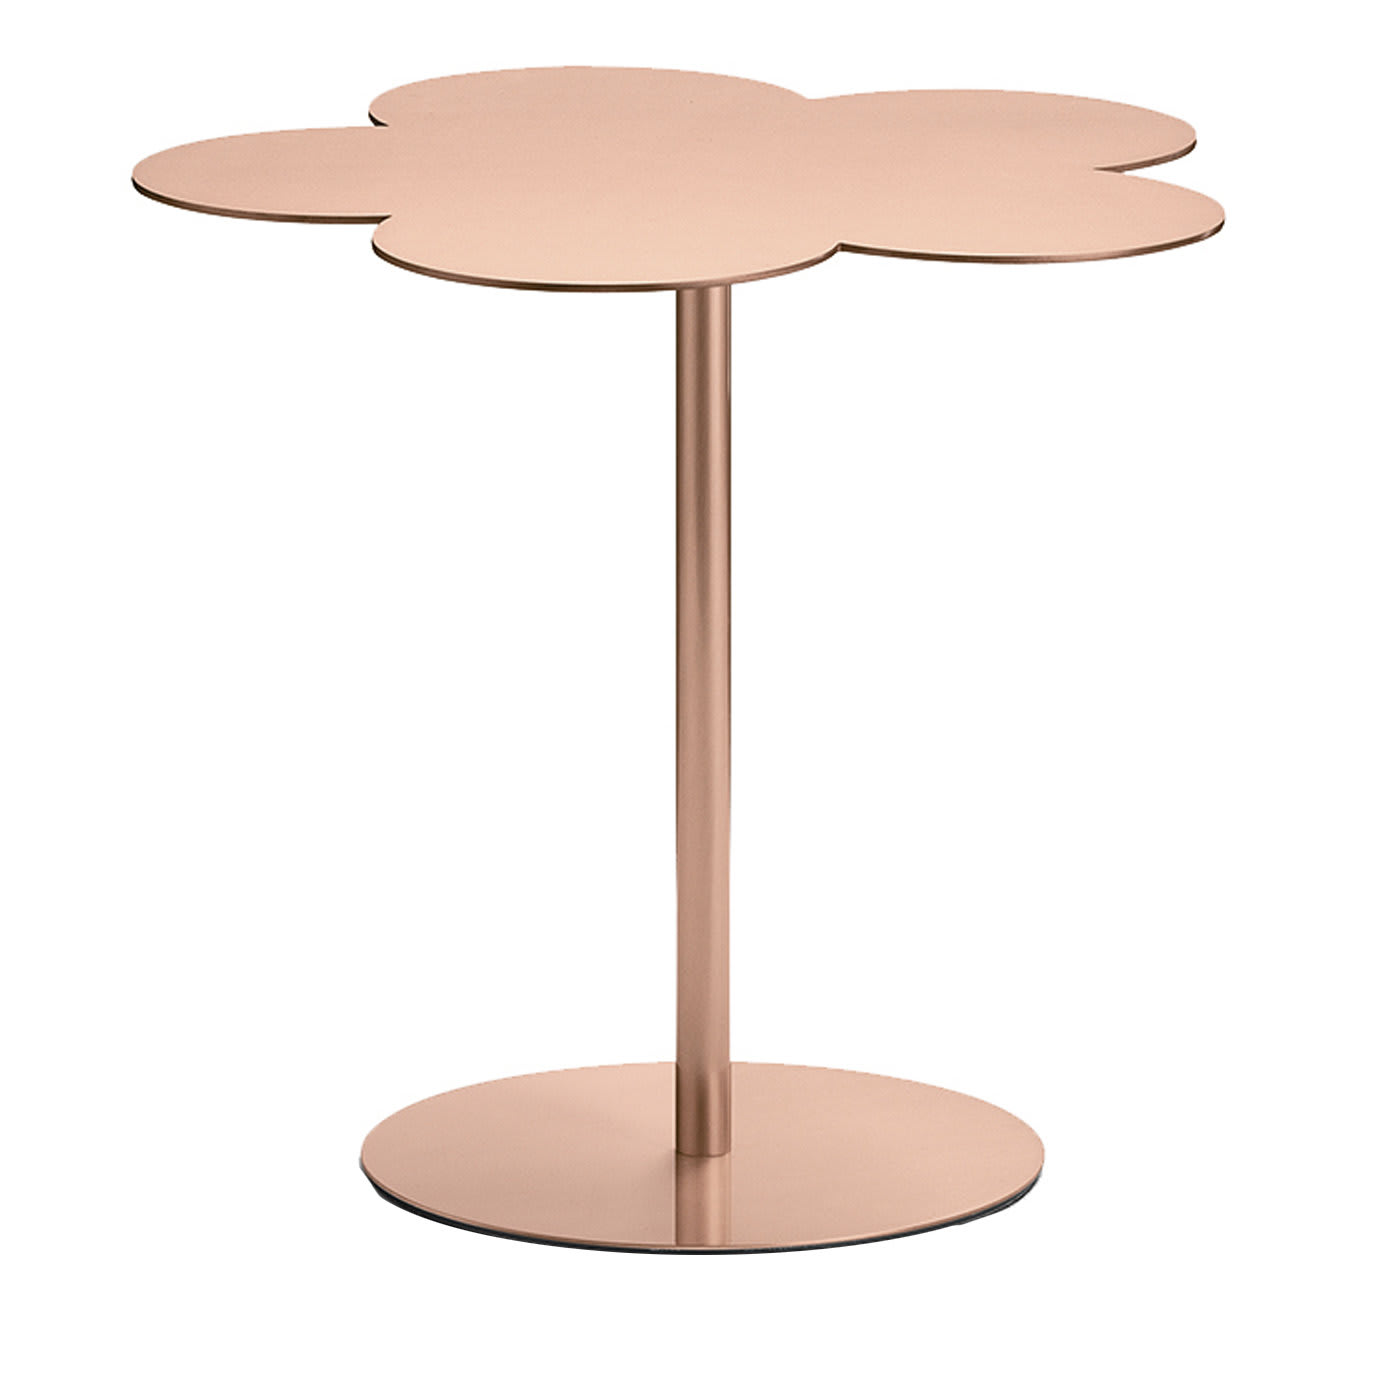 Flowers Copper Small Side Table By Stefano Giovannoni - Ghidini 1961